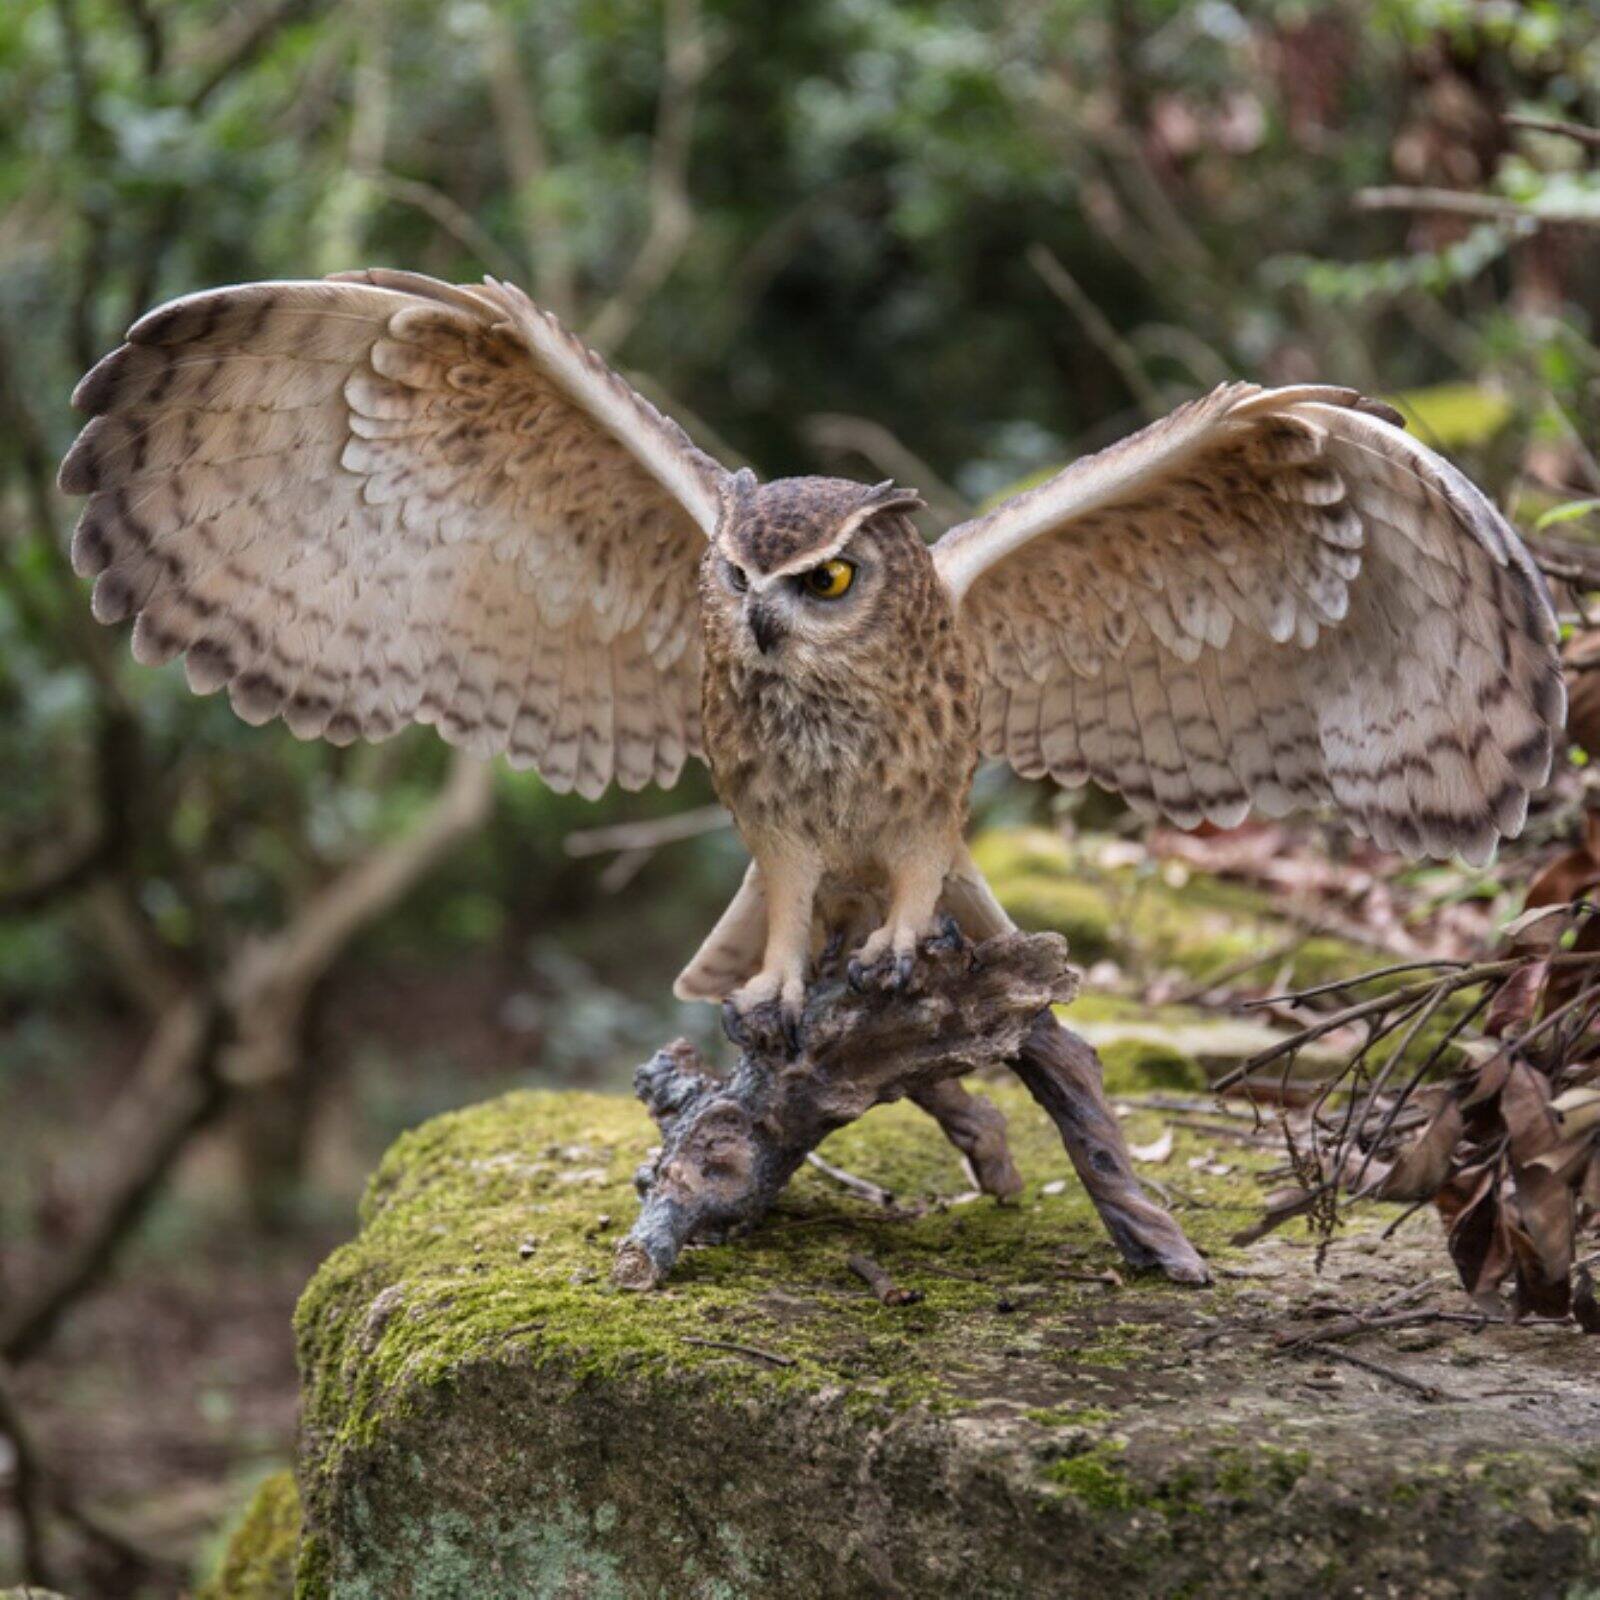 HI-LINE GIFT LTD. EAGLE OWL ON BRANCH W/WINGS OUT - image 1 of 5